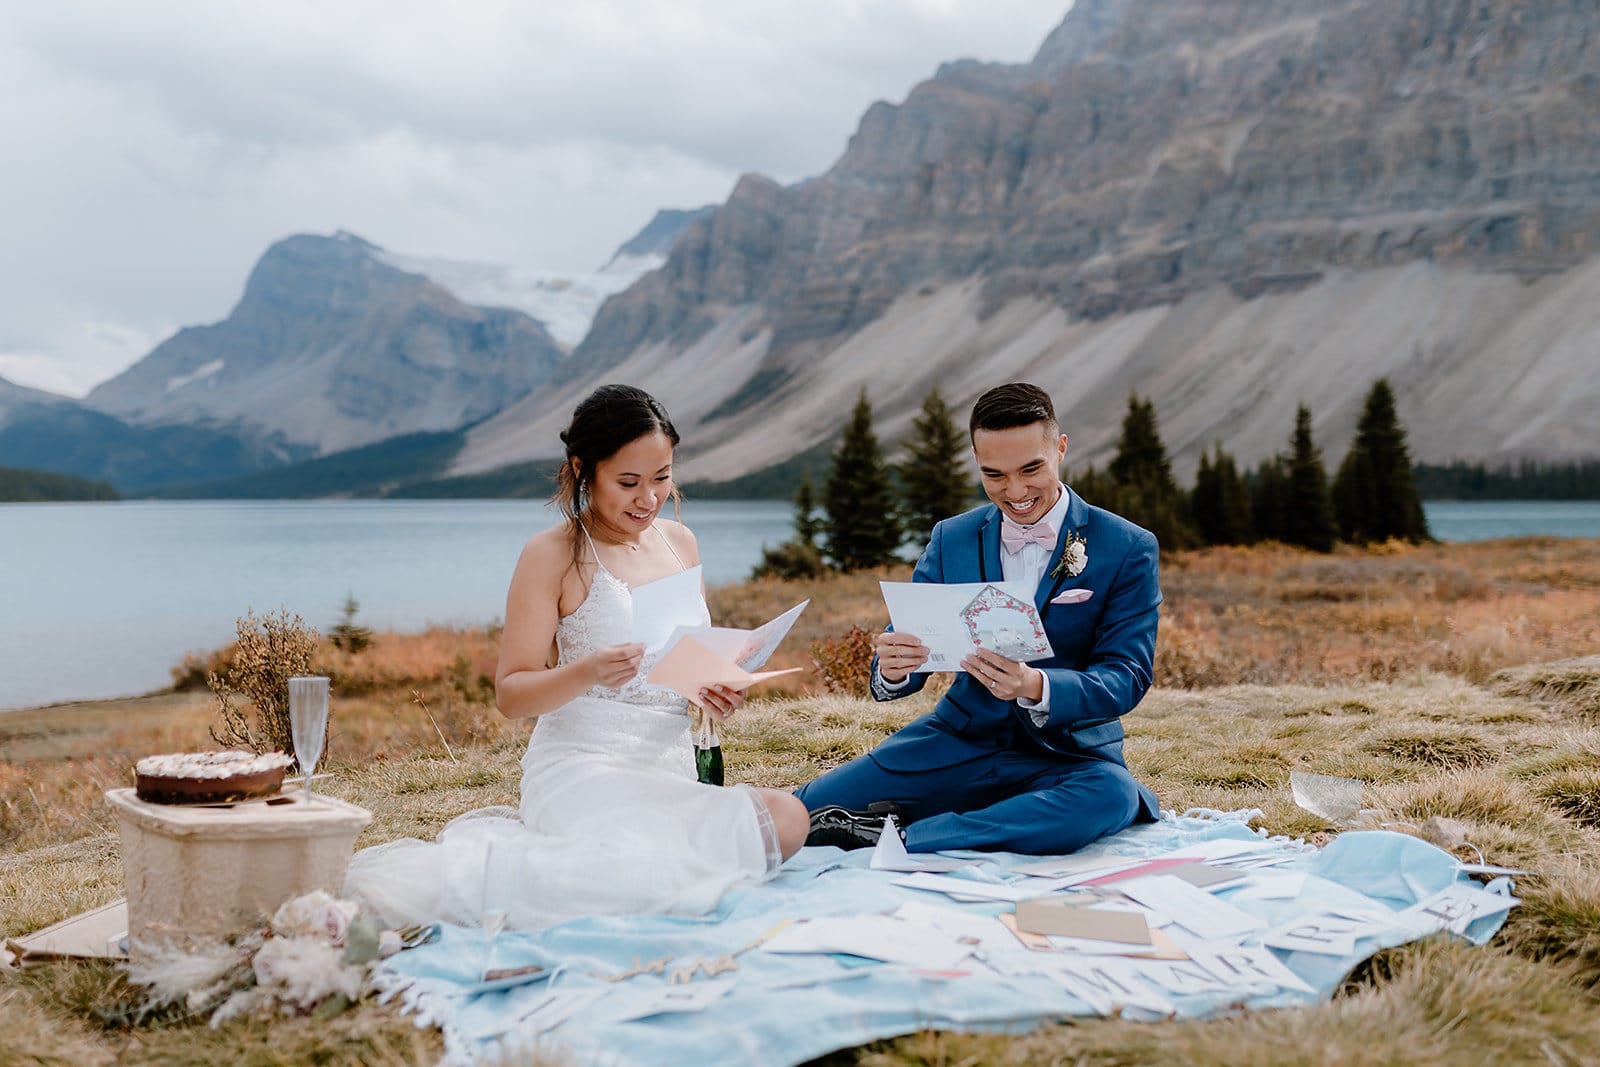 A bride and groom including their friends and family in their elopement by reading letters written to them while having a picnic in front of Bow lake in Banff Alberta